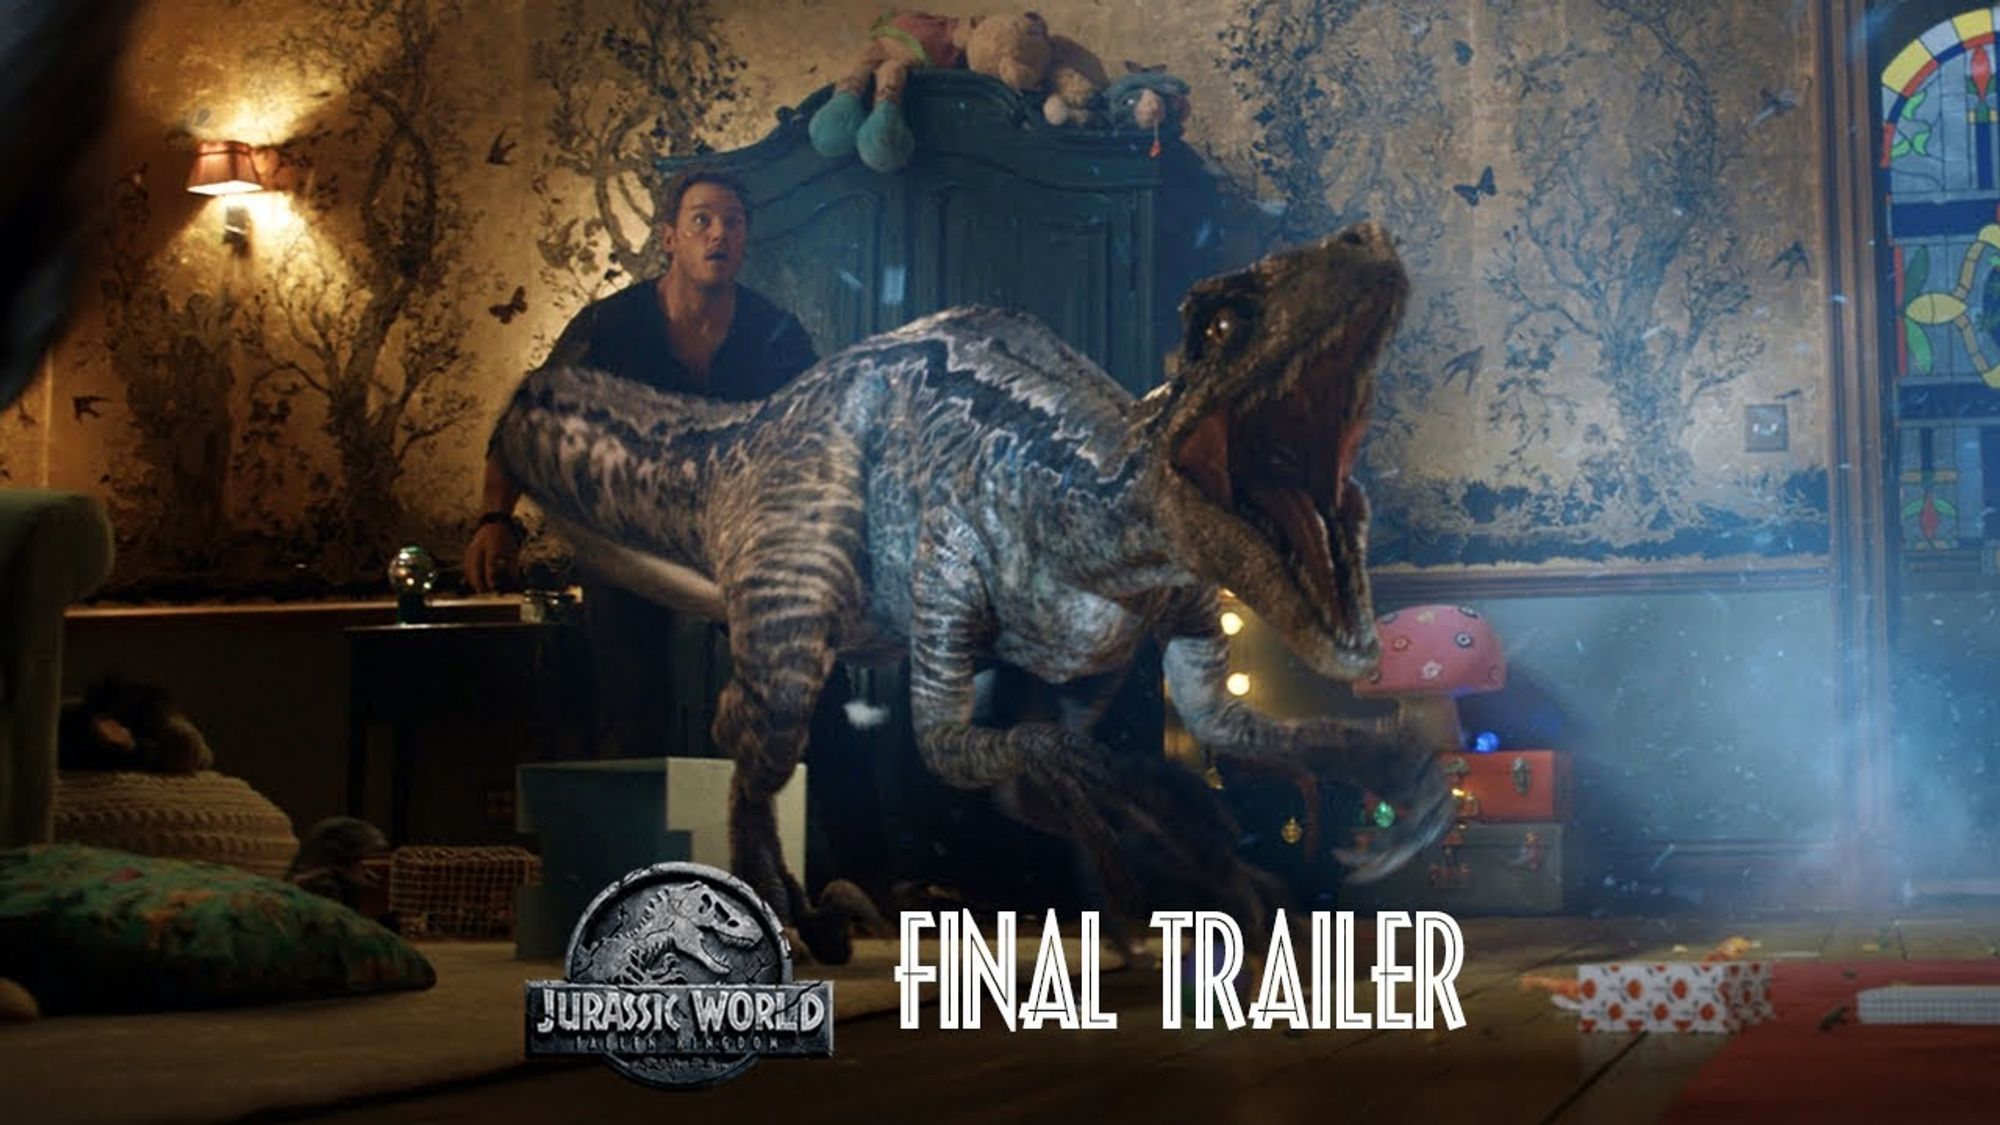 Science Facts That 'Jurassic World: Fallen Kingdom' Ignored